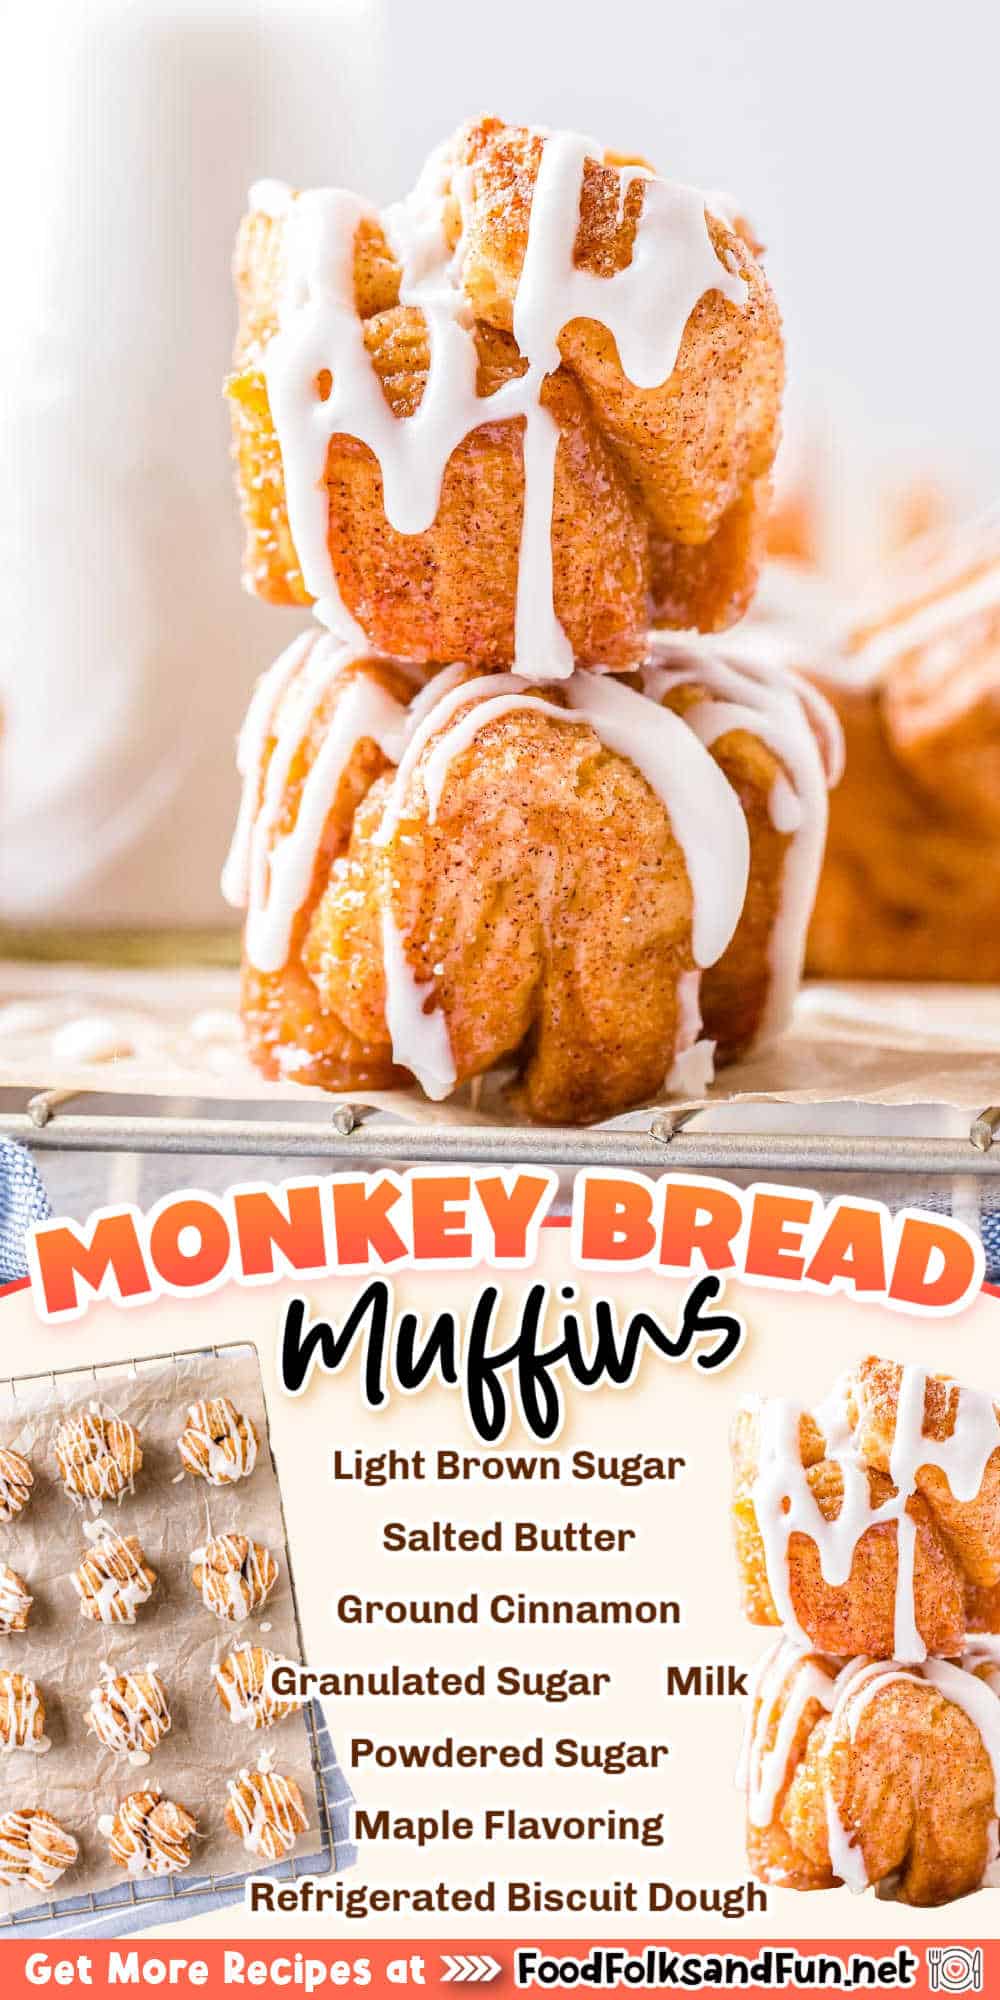 Up your muffin game with this delicious Monkey Bread Muffin Recipe. It’s a fun twist on the classic breakfast treat that makes it easier to eat and more portable! via @foodfolksandfun